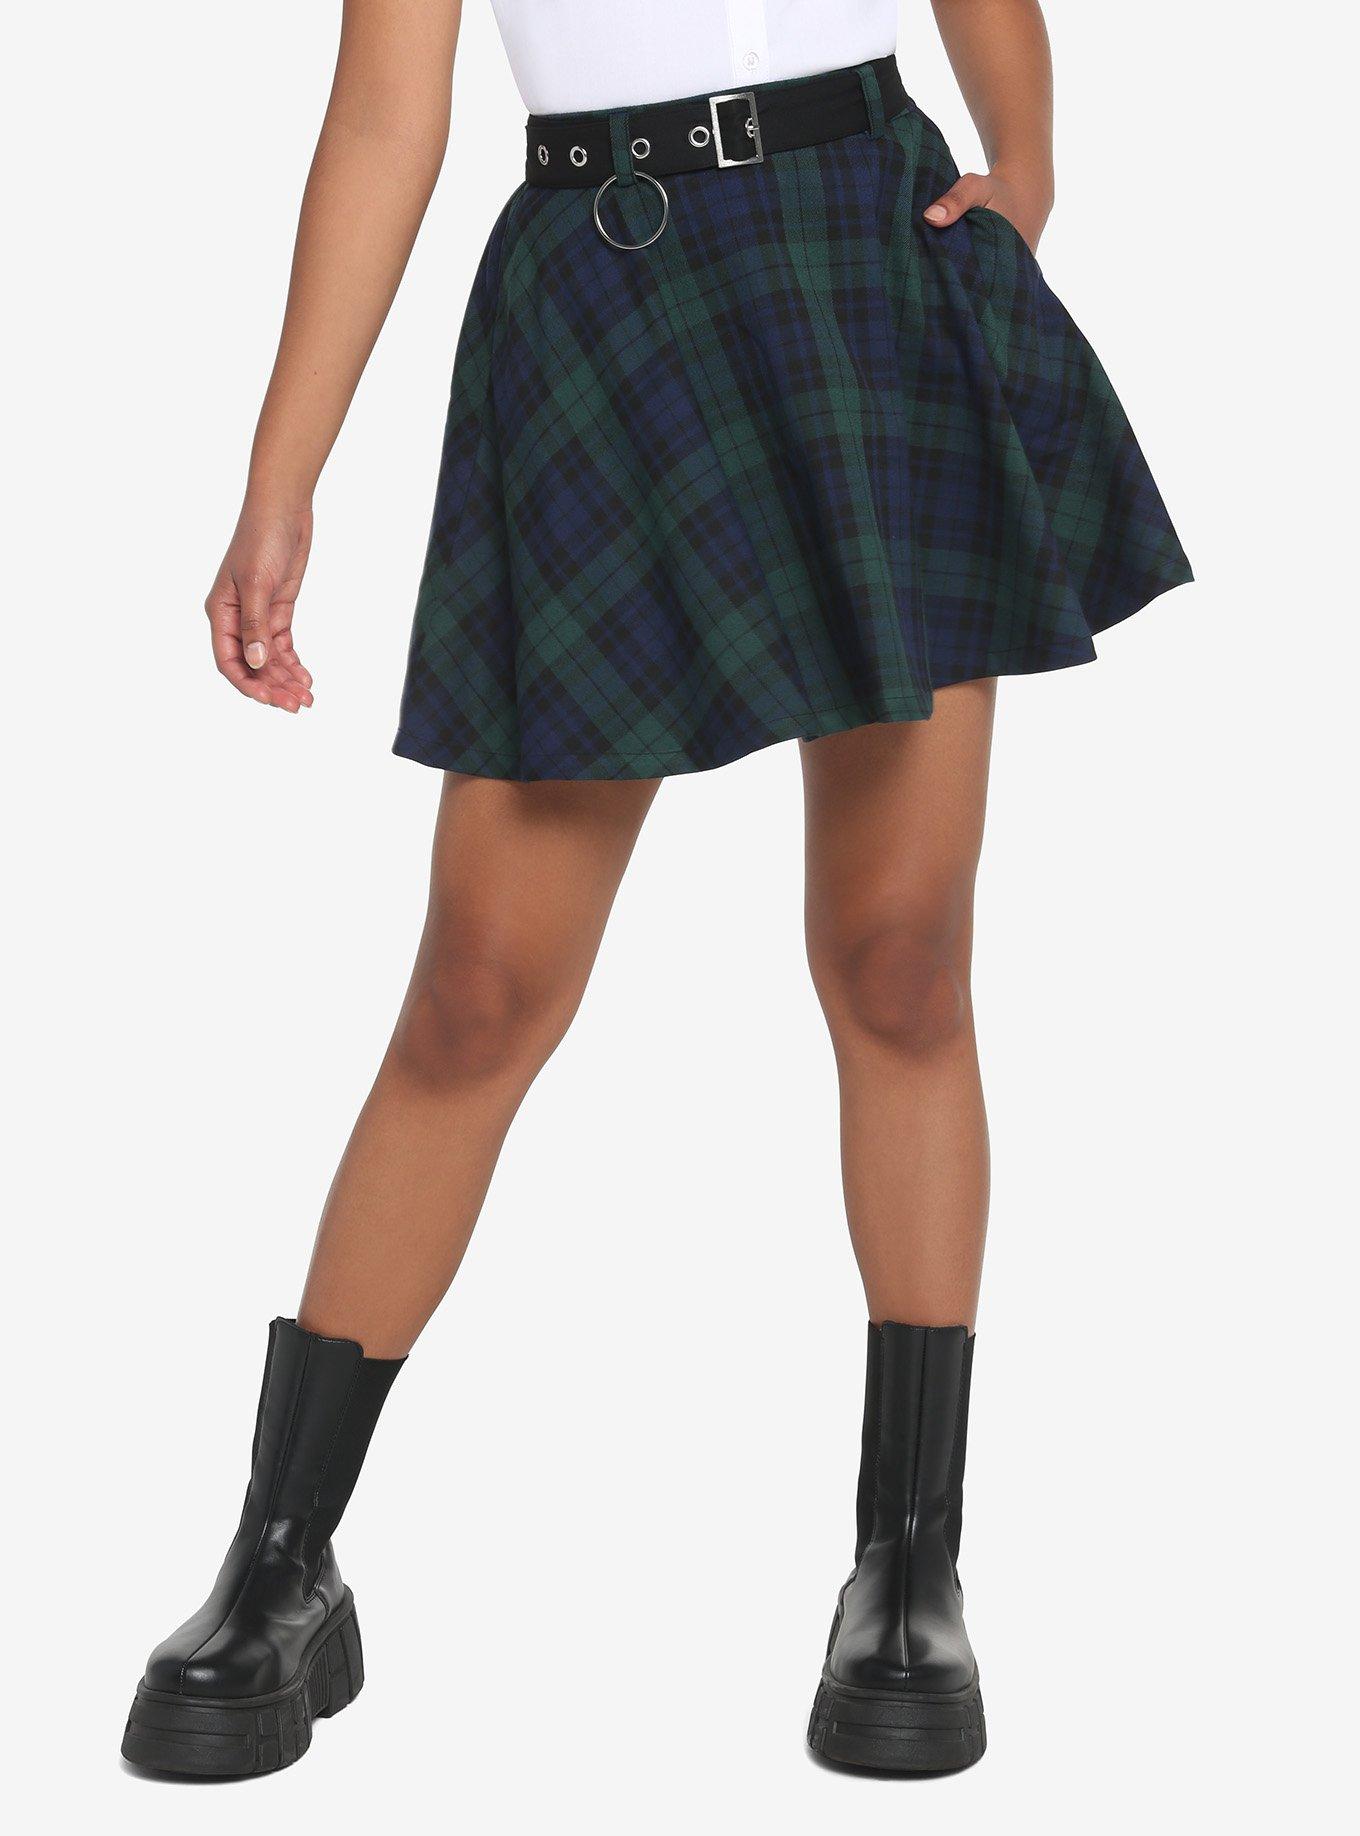 Sale 64% - New collection Best Choice Green & Blue Plaid Skirt With ...